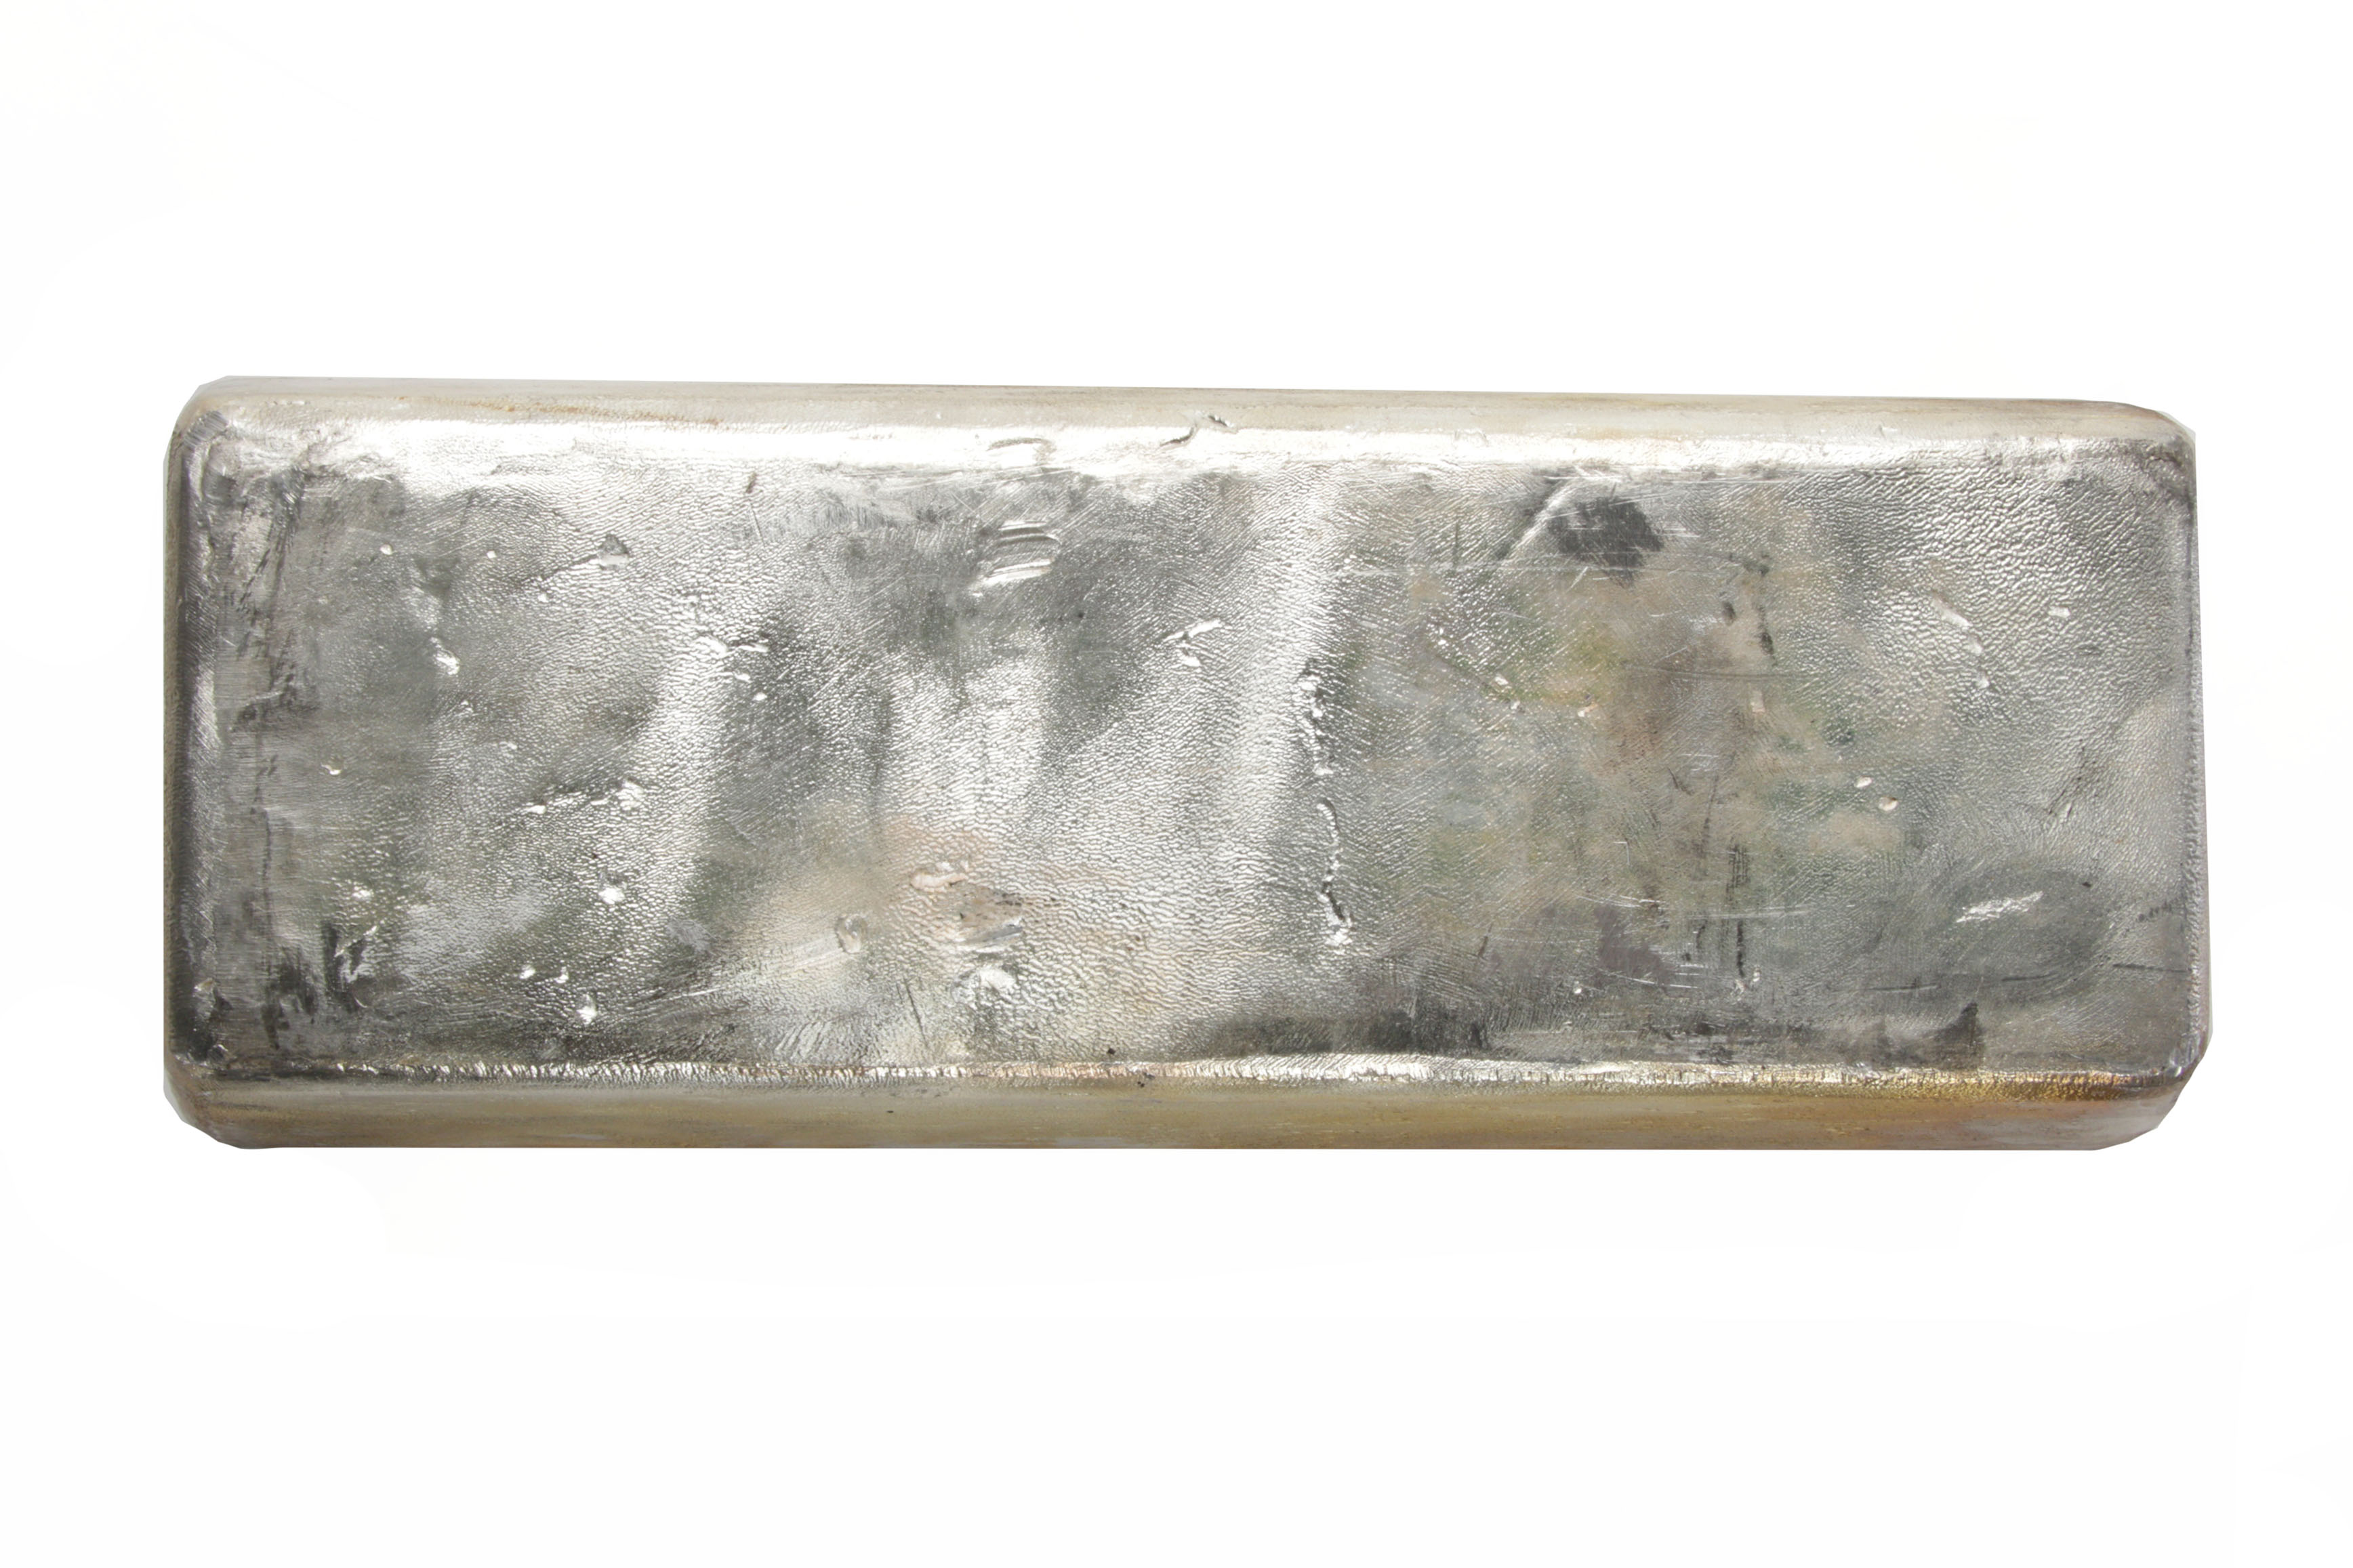 royal canadian mint silver bar serial number